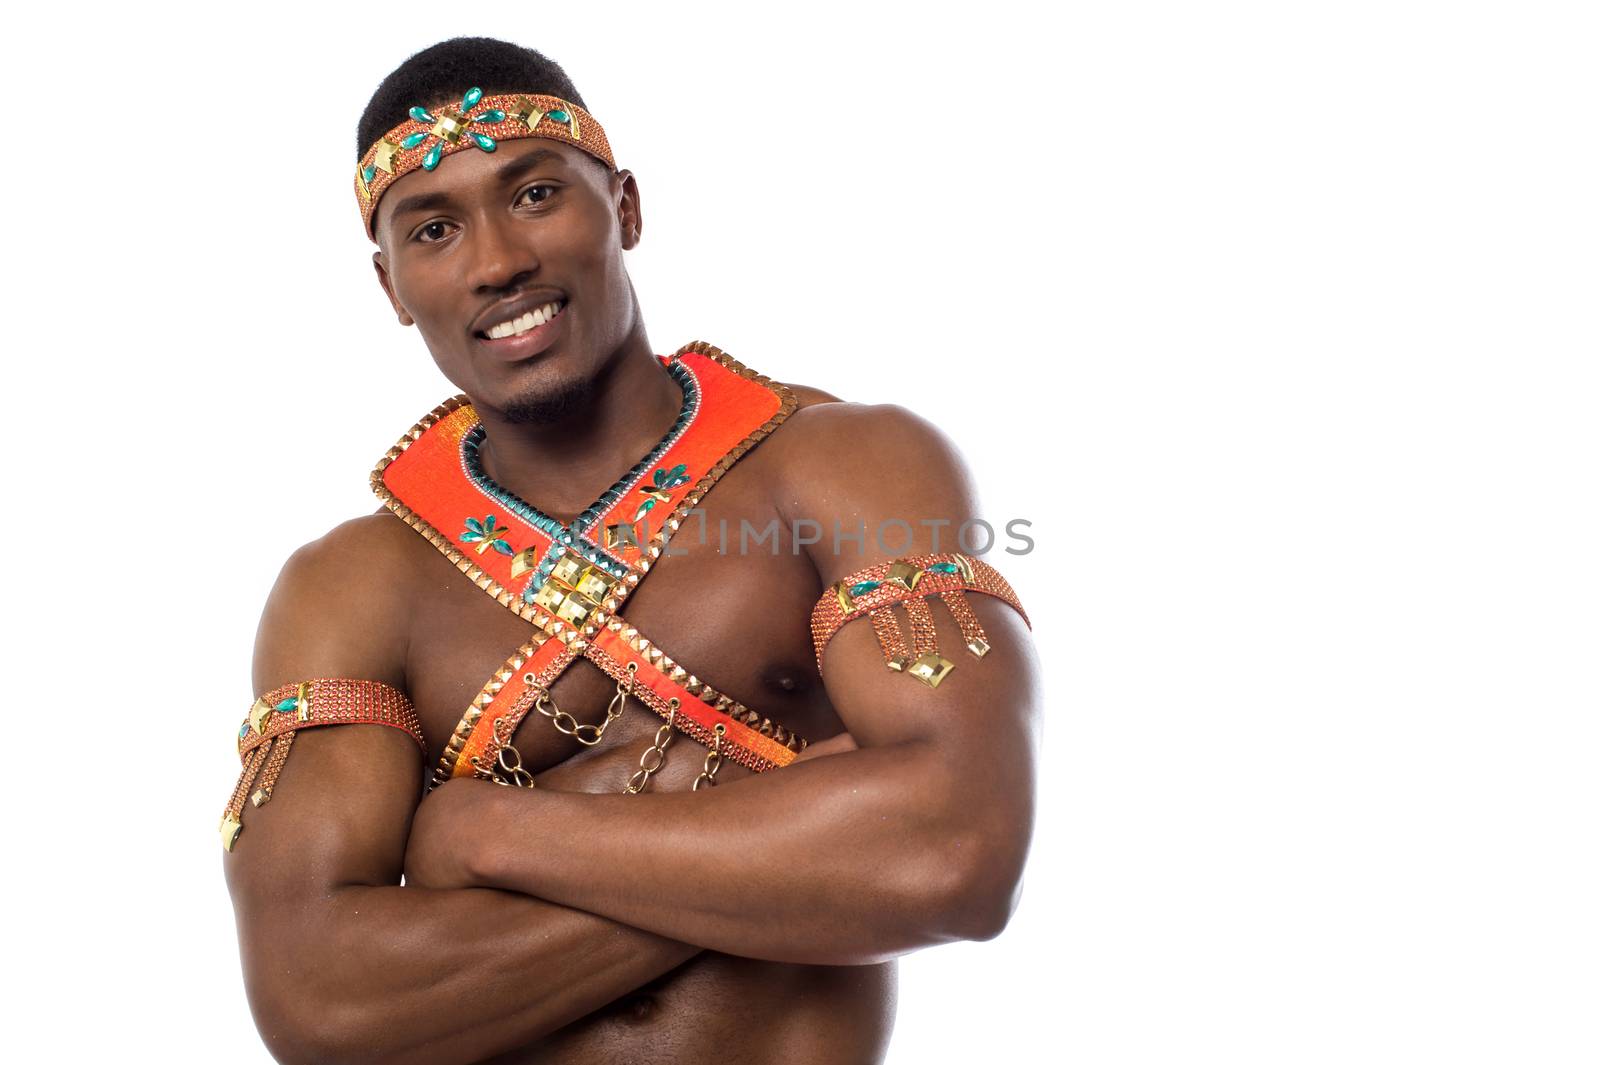 Male samba dancer posing with crossed arms